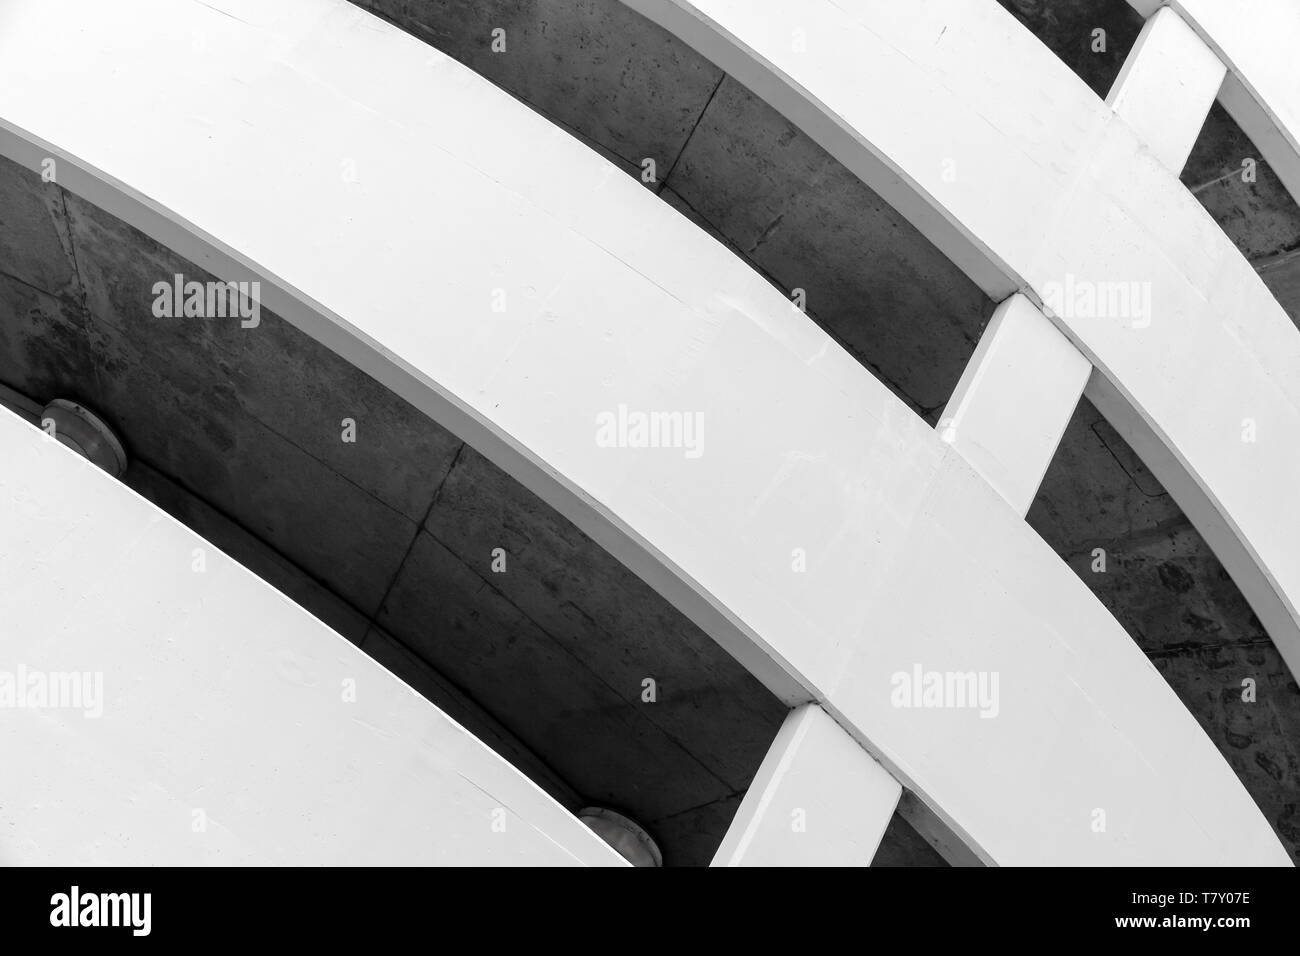 Parking lot, round white concrete building exterior, abstract fragment Stock Photo